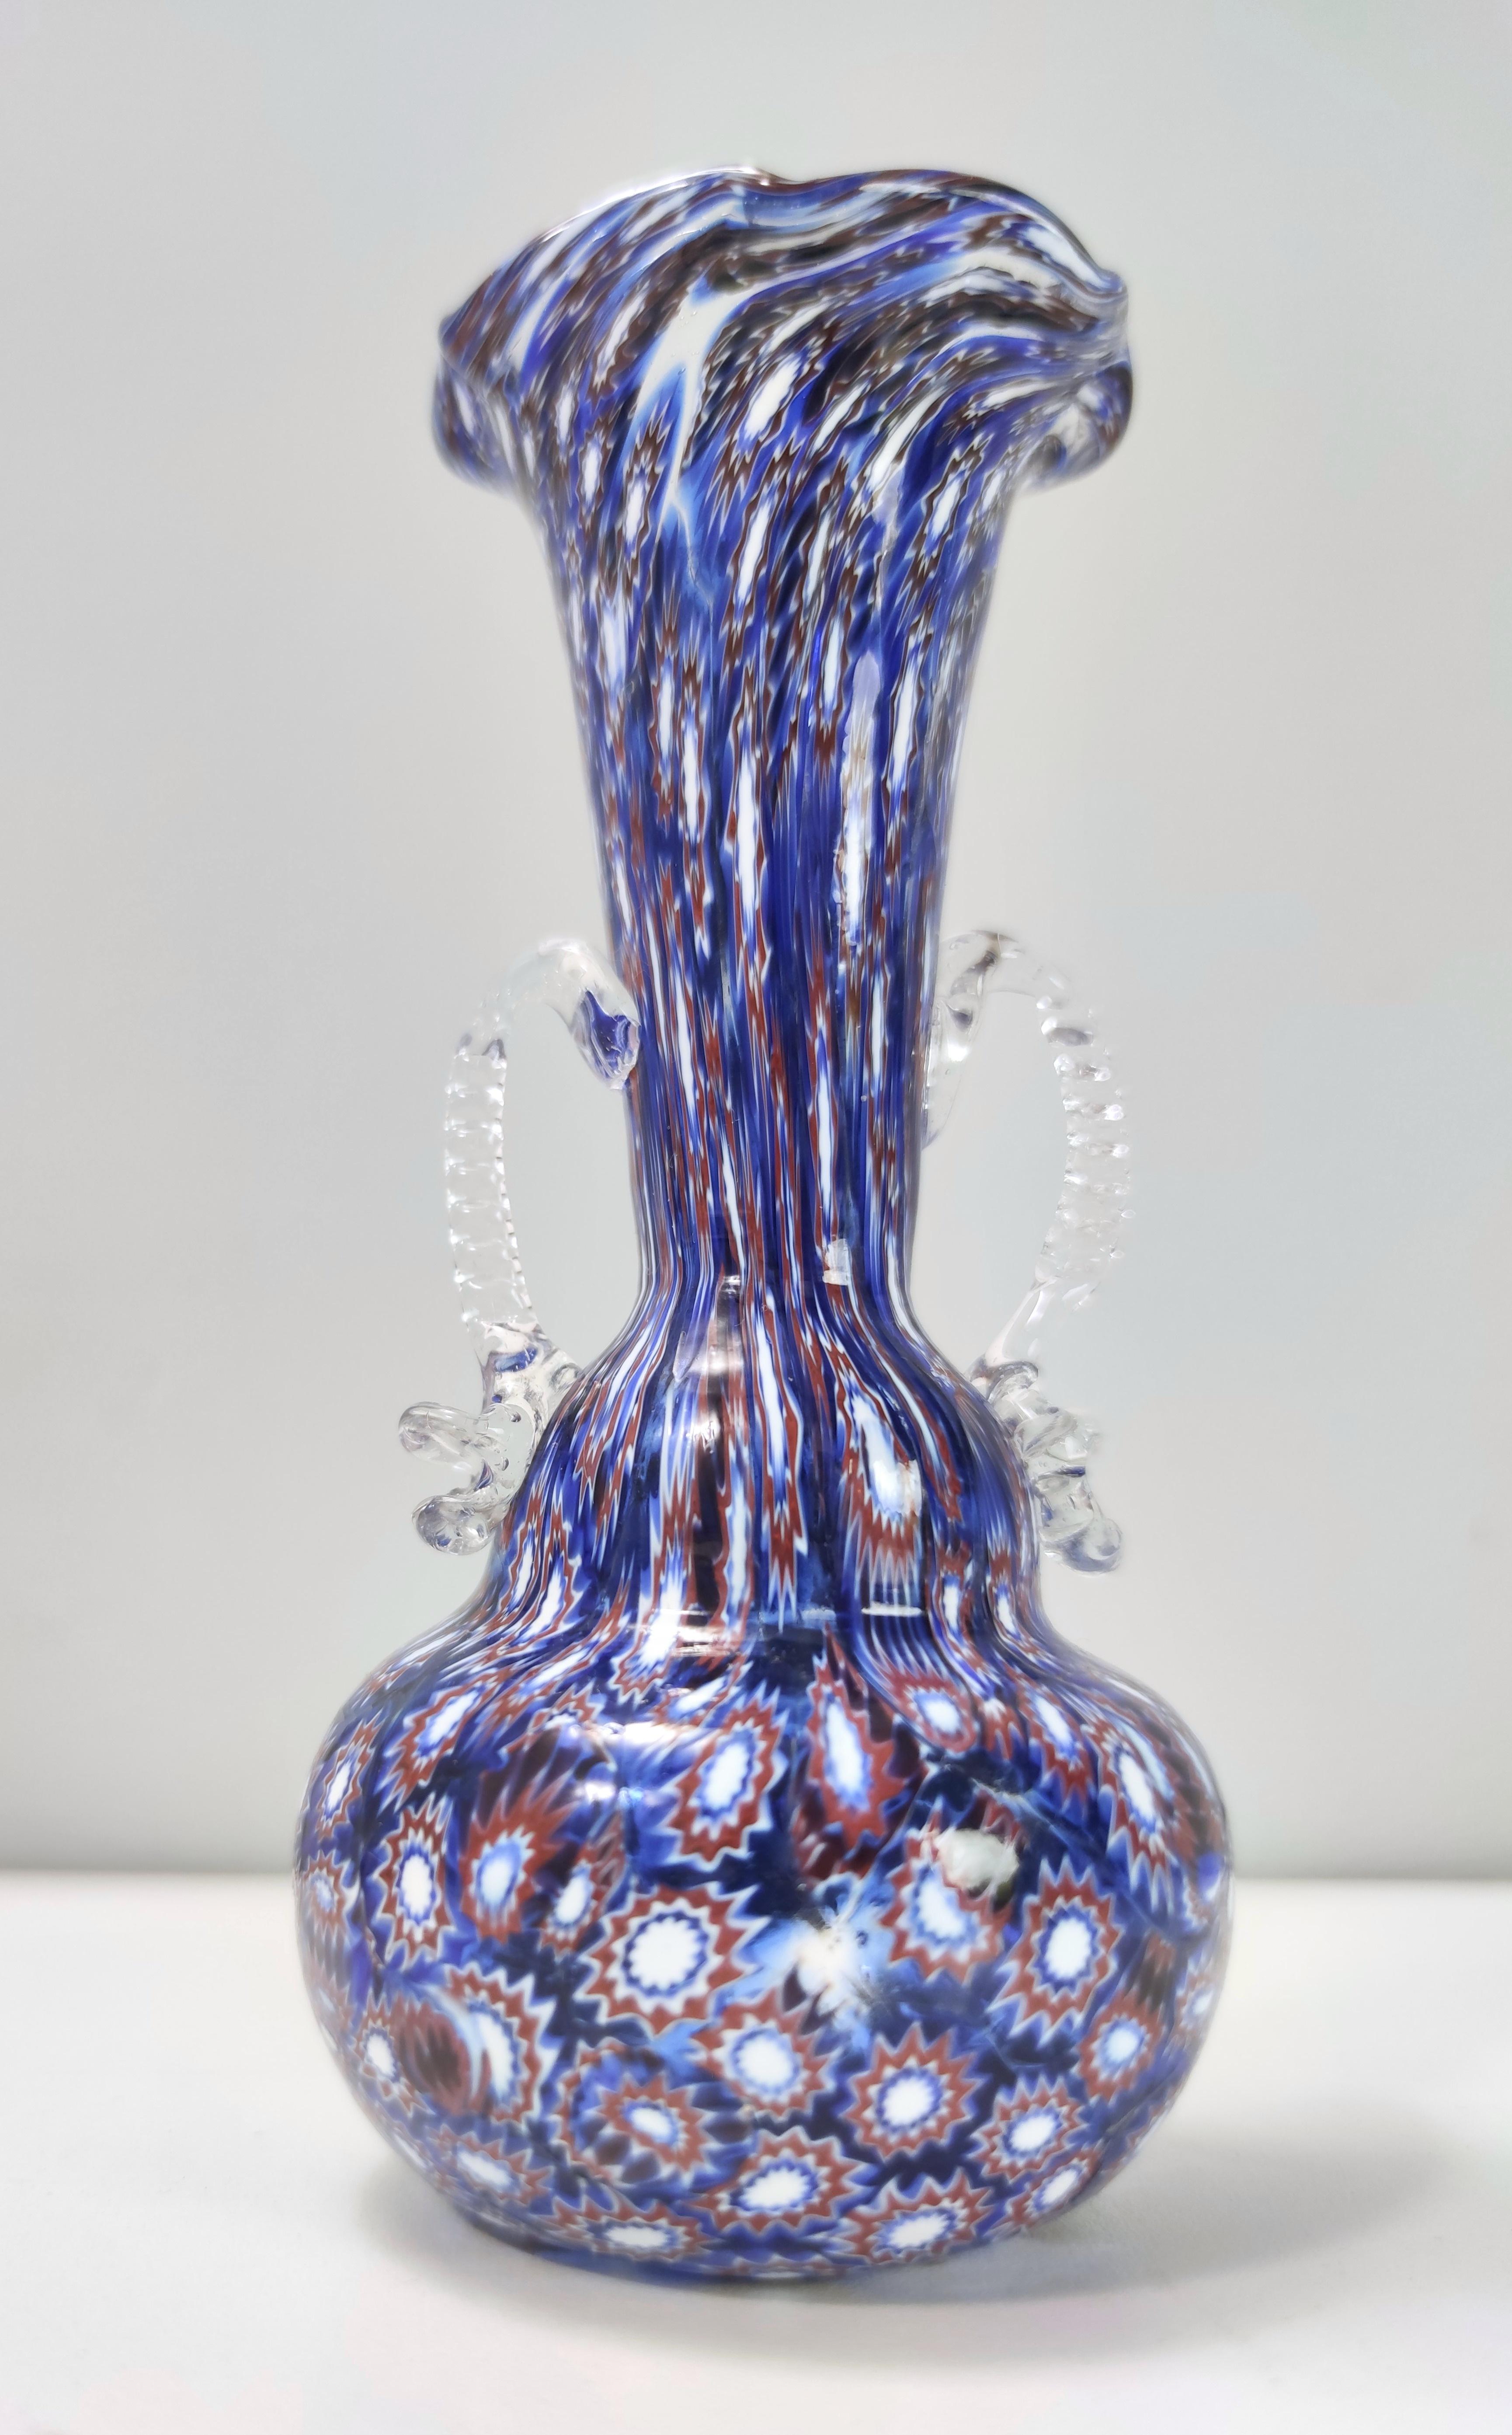 Vintage Blue Murano Glass Vase Ascribable to Fratelli Toso with Murrines, Italy For Sale 5